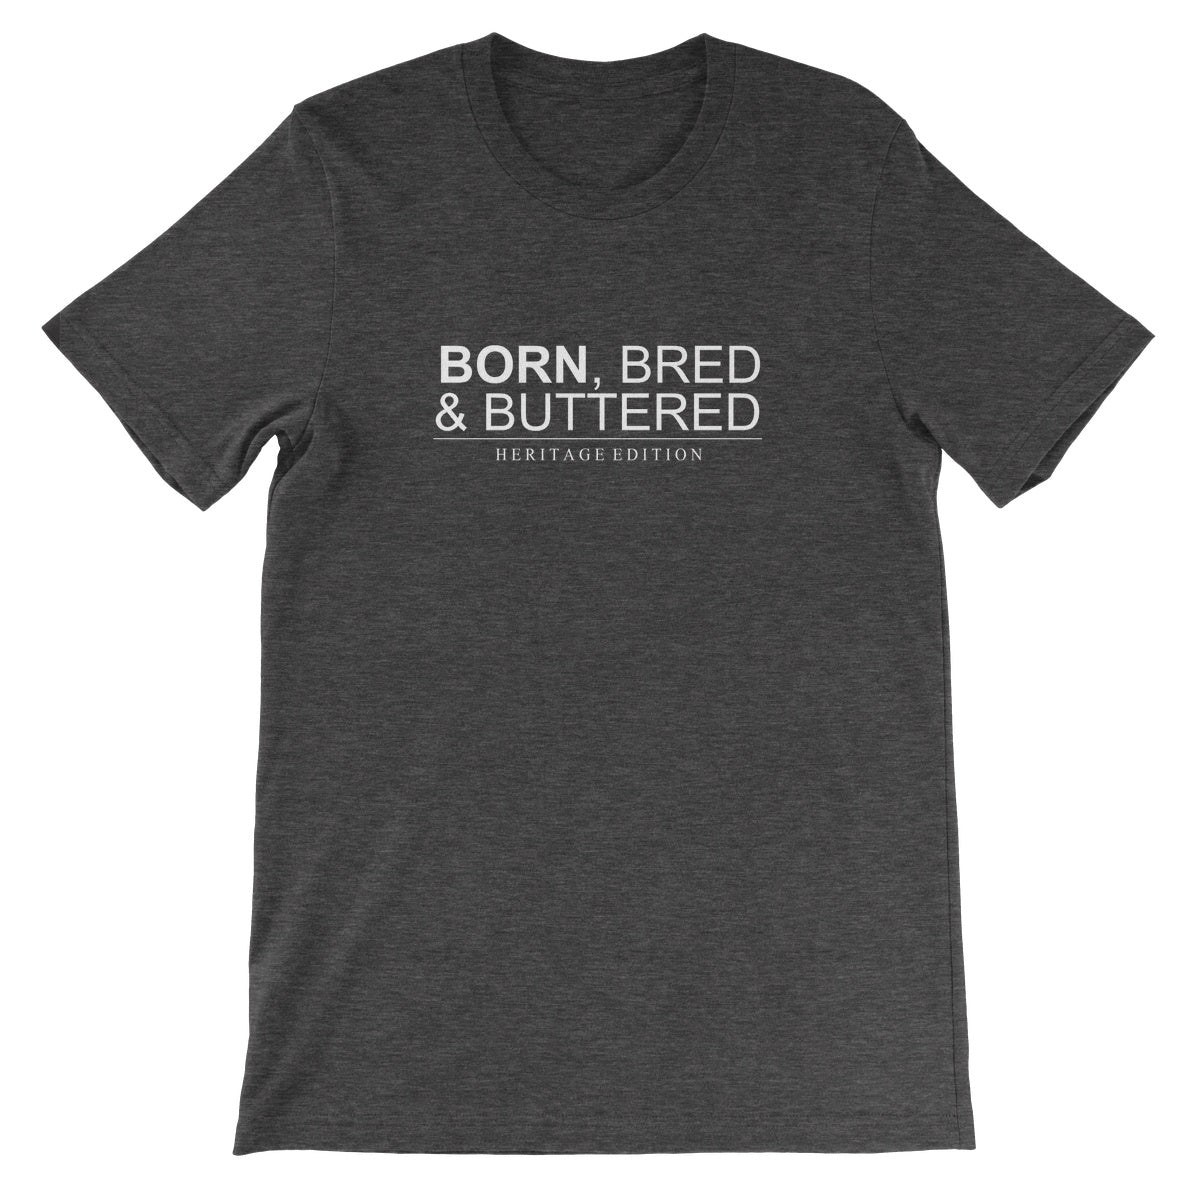 BORN, BRED & BUTTERED ICE APPAREL  Unisex Short Sleeve T-Shirt